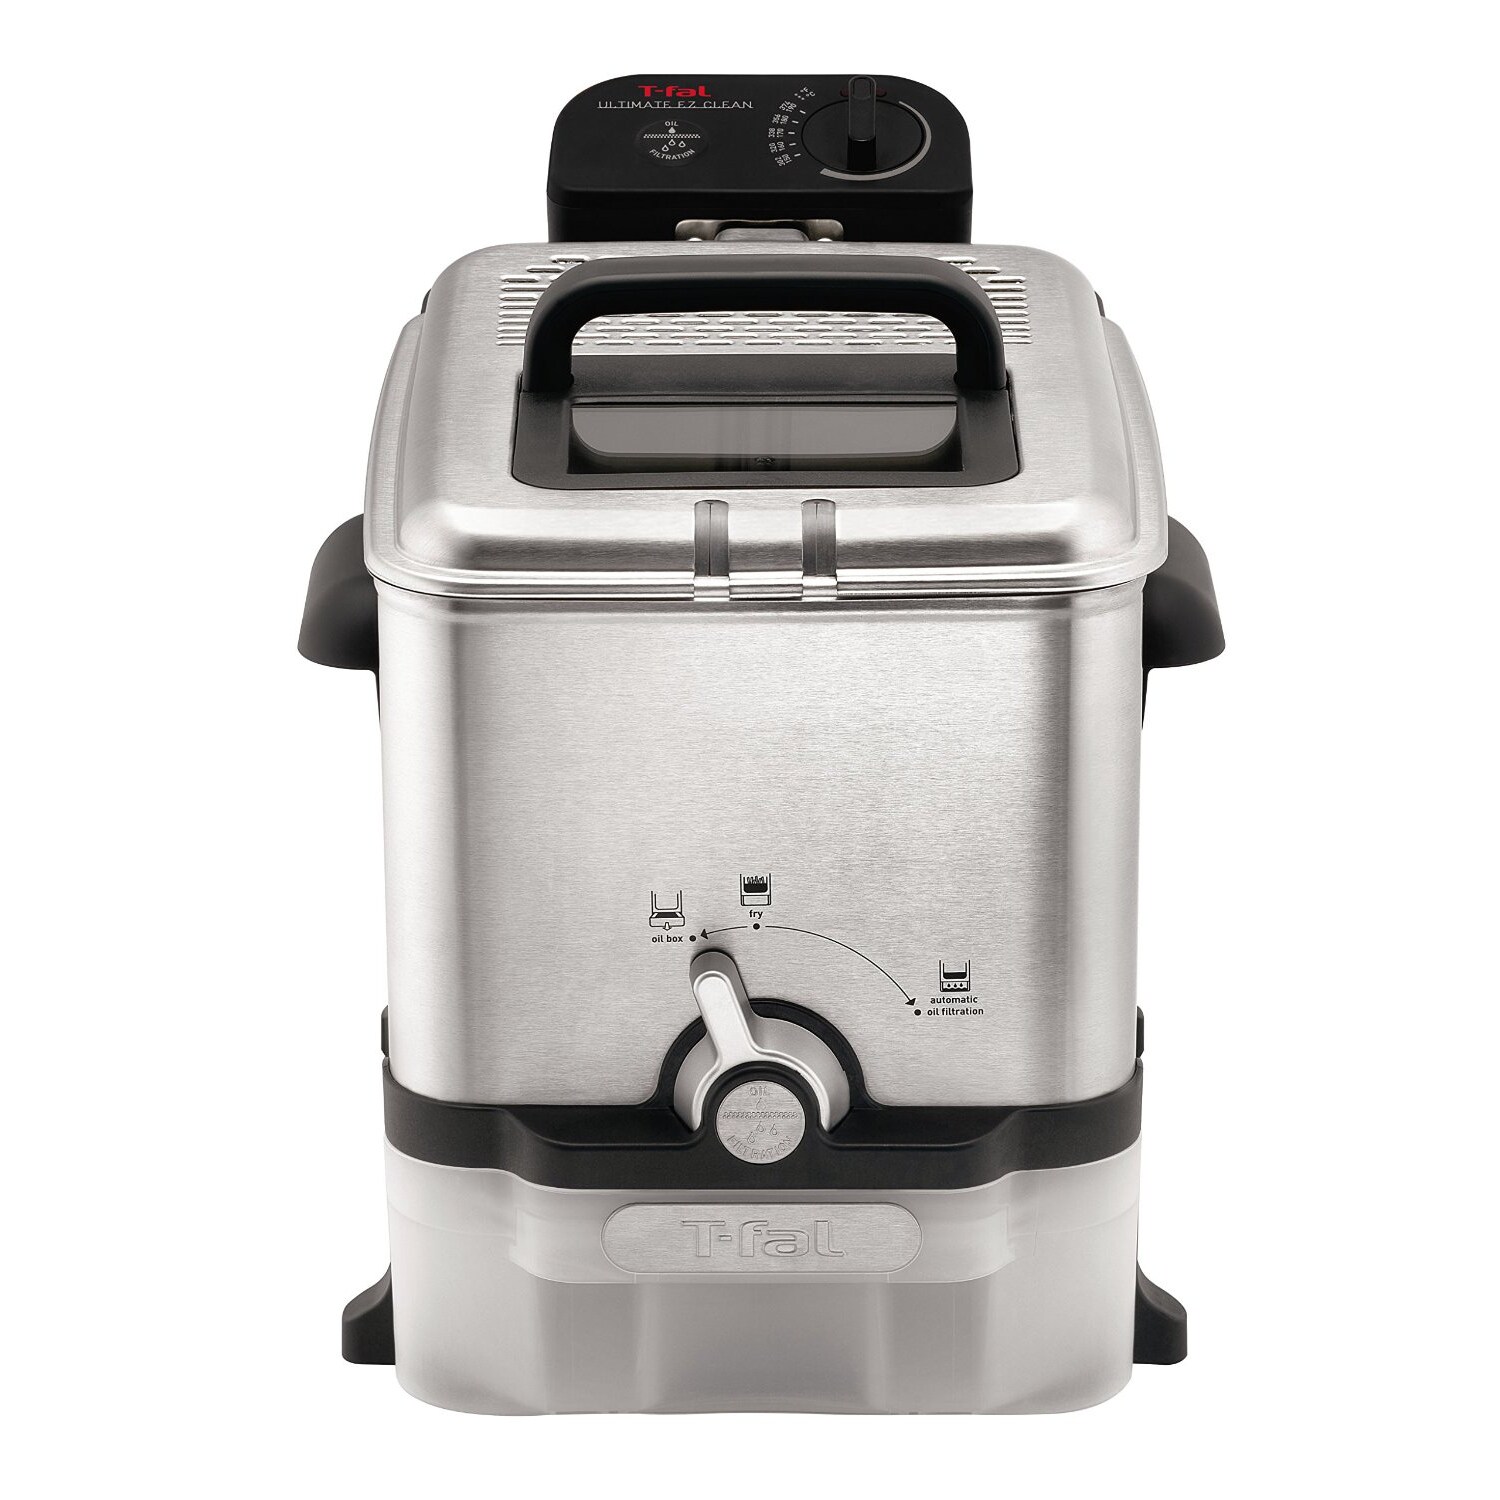 T-fal FR8000 Deep Fryer with Basket Stainless Steel for sale online 